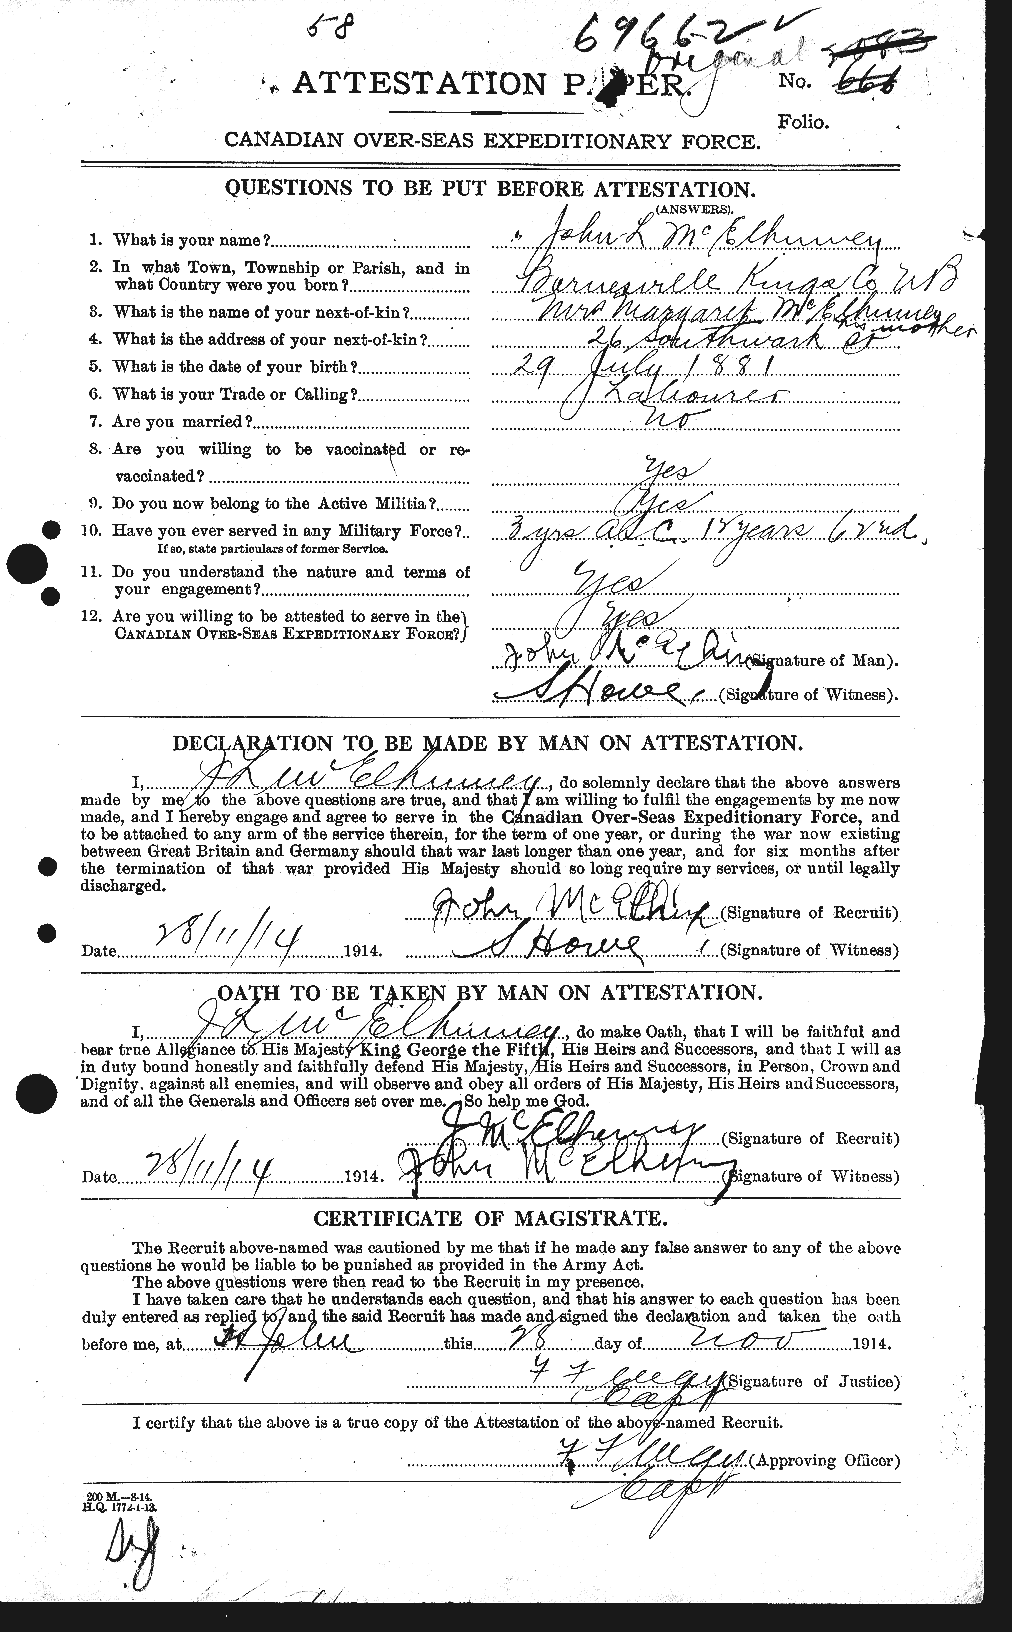 Personnel Records of the First World War - CEF 521994a